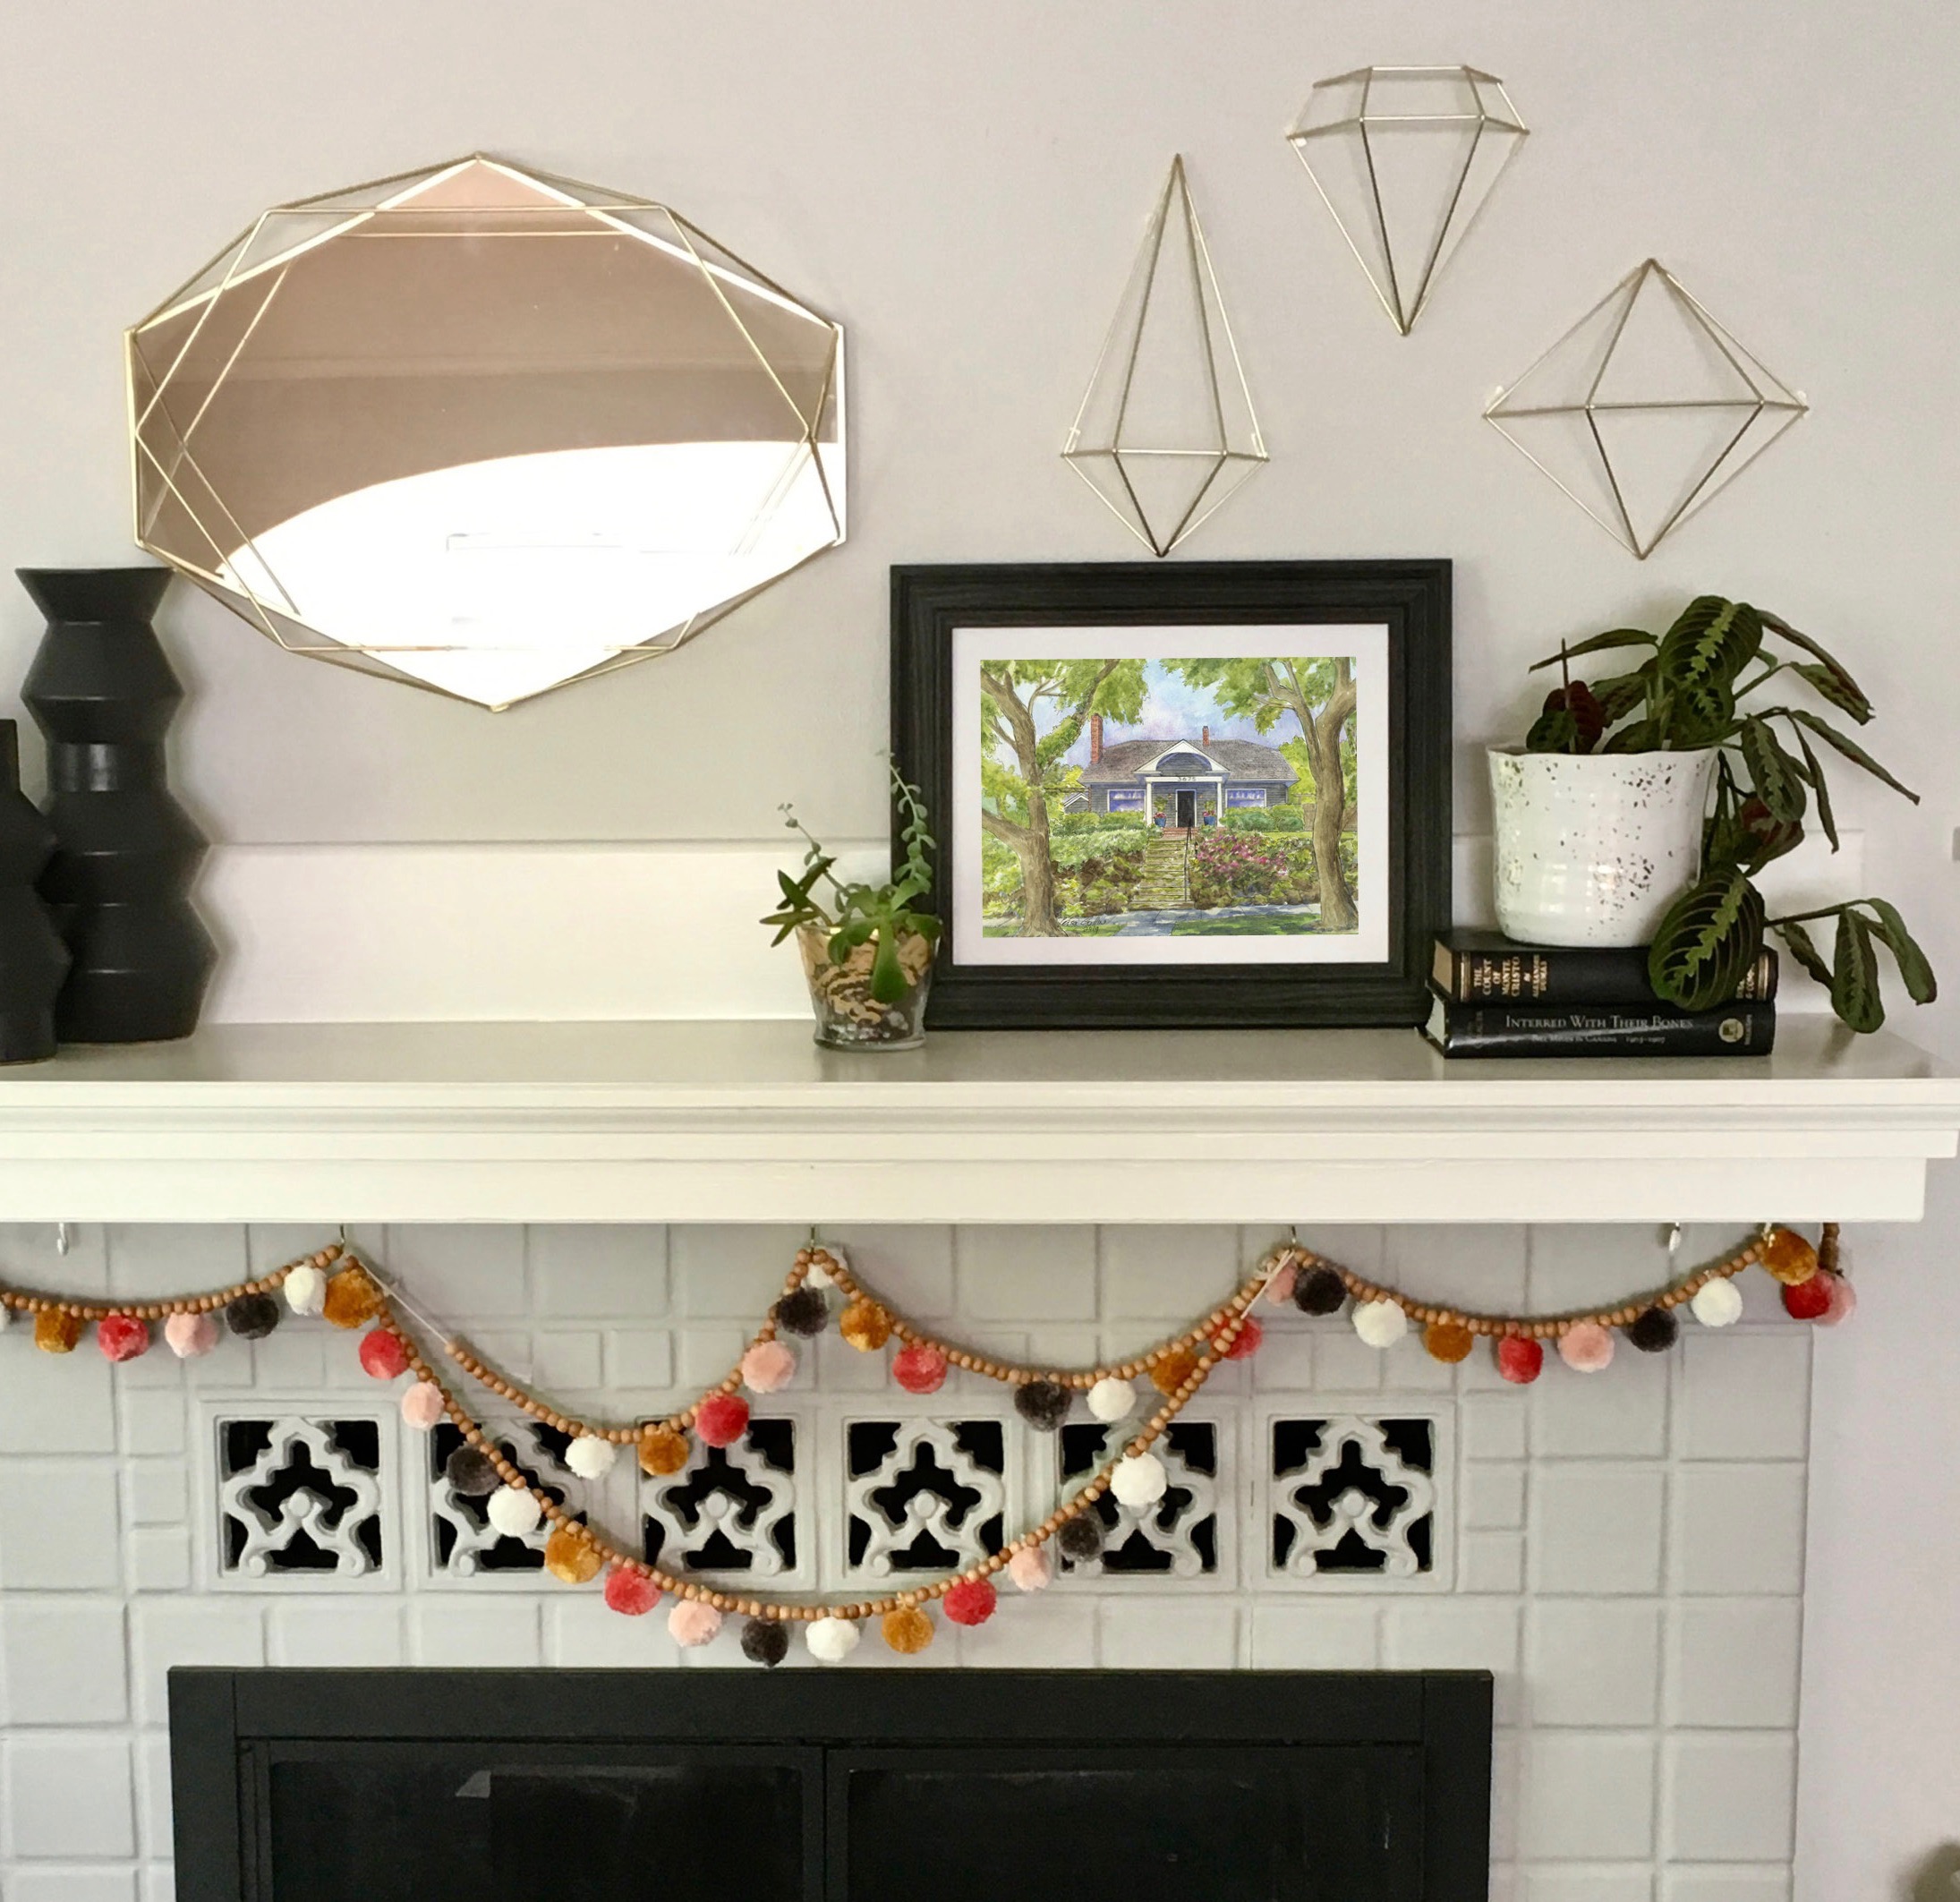 My client Erin sent me this photo. The original portrait of her cute Portland bungalow sits artfully above the fire place. 